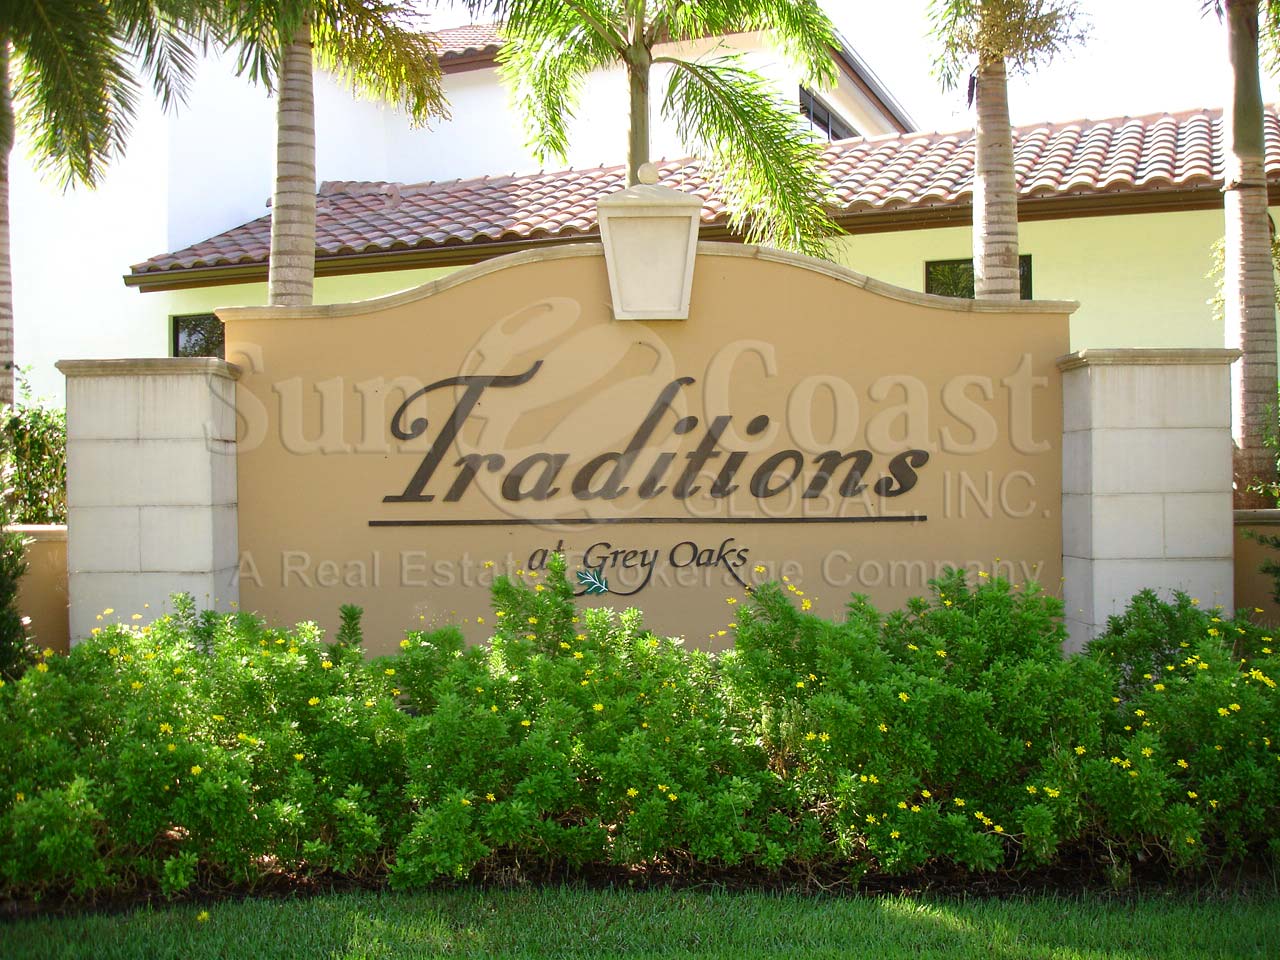 Traditions signage